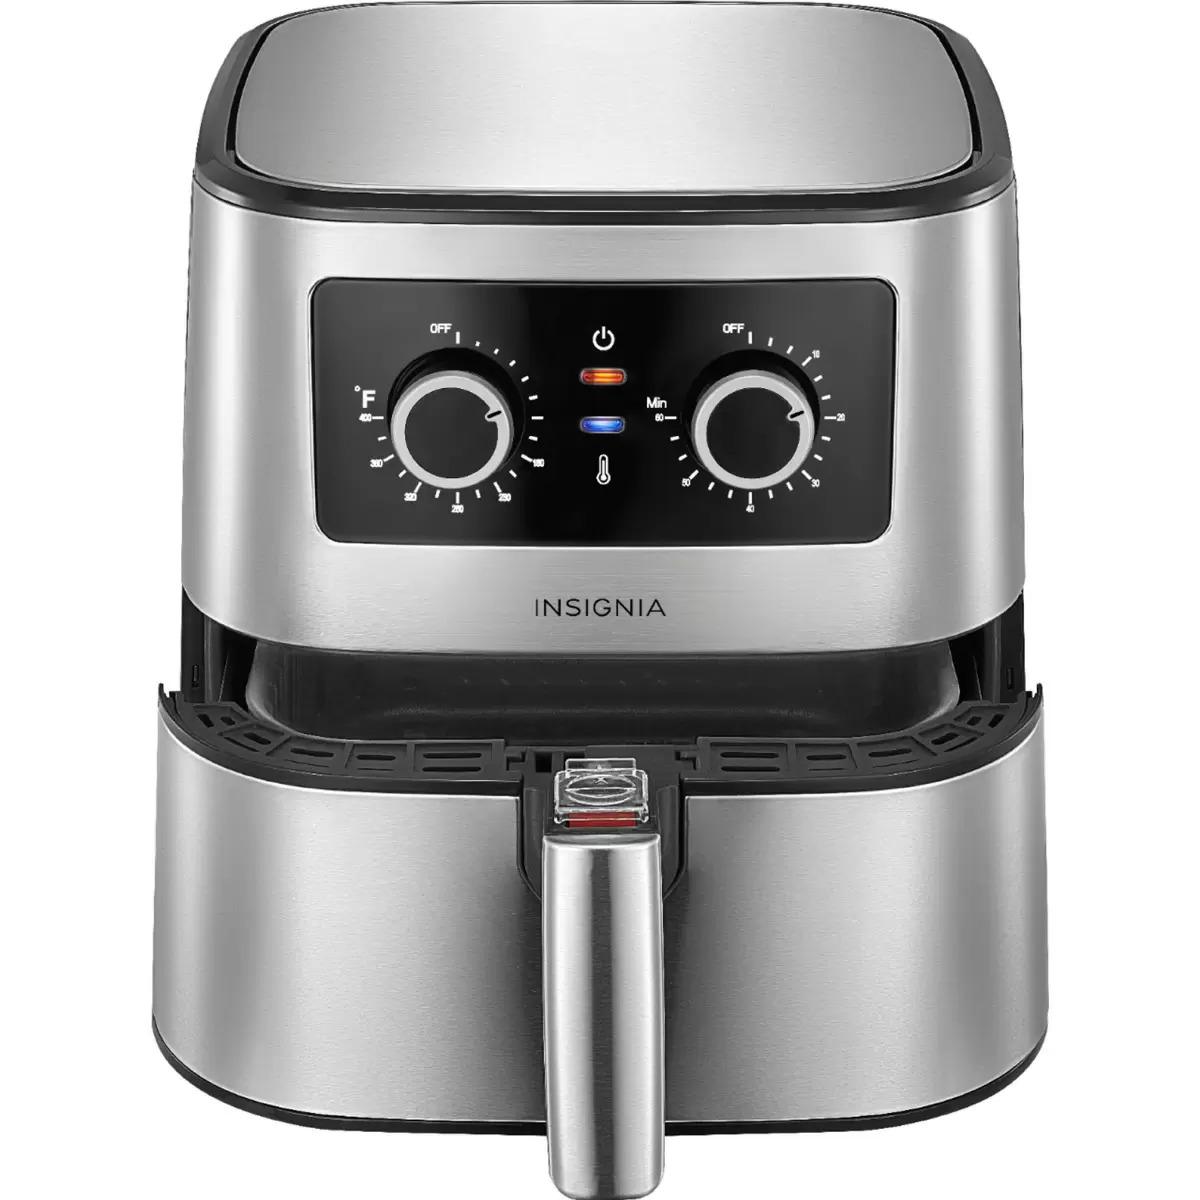 Insignia 5-Quart Stainless Steel Analog Air Fryer for $34.99 Shipped